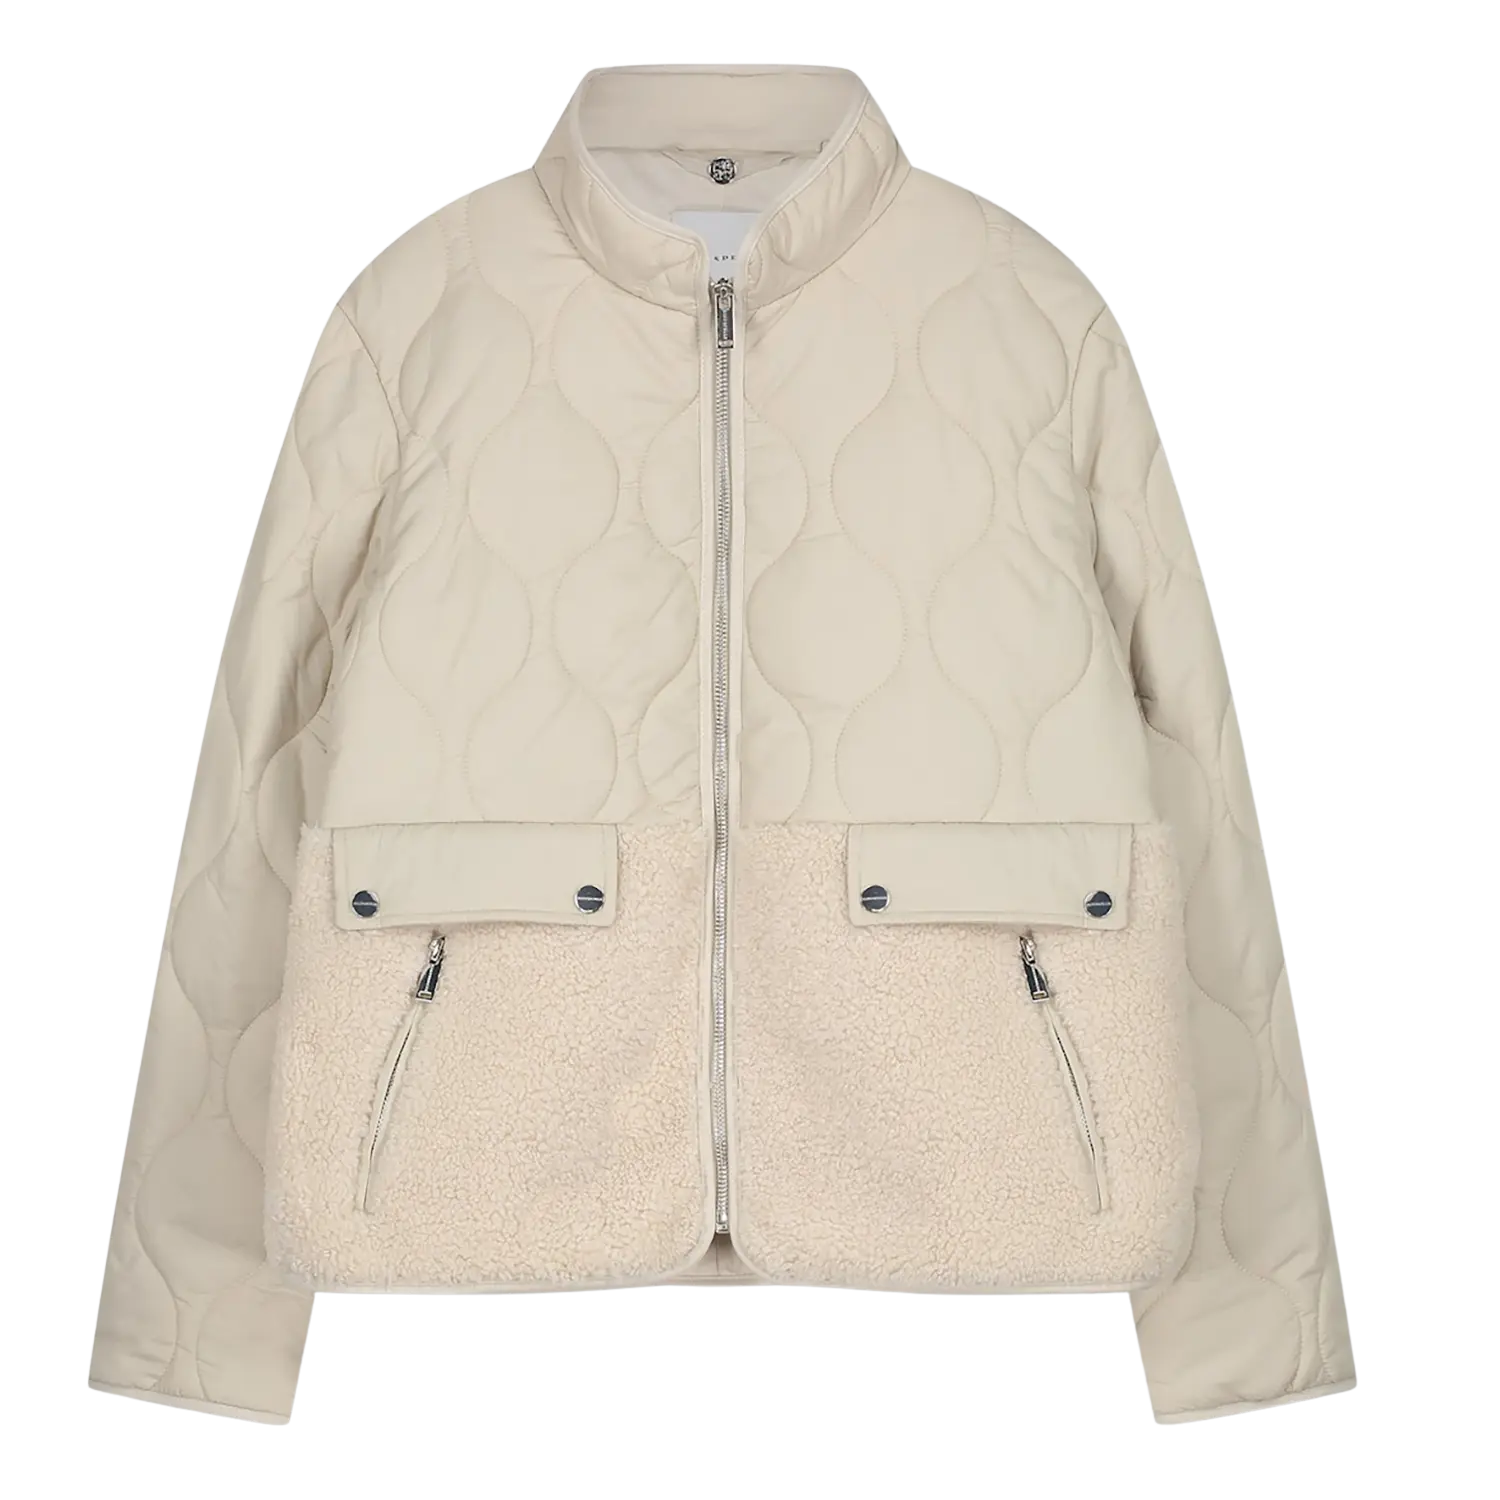 Rino & Pelle Believe Padded Jacket With Teddy Fabric for Women